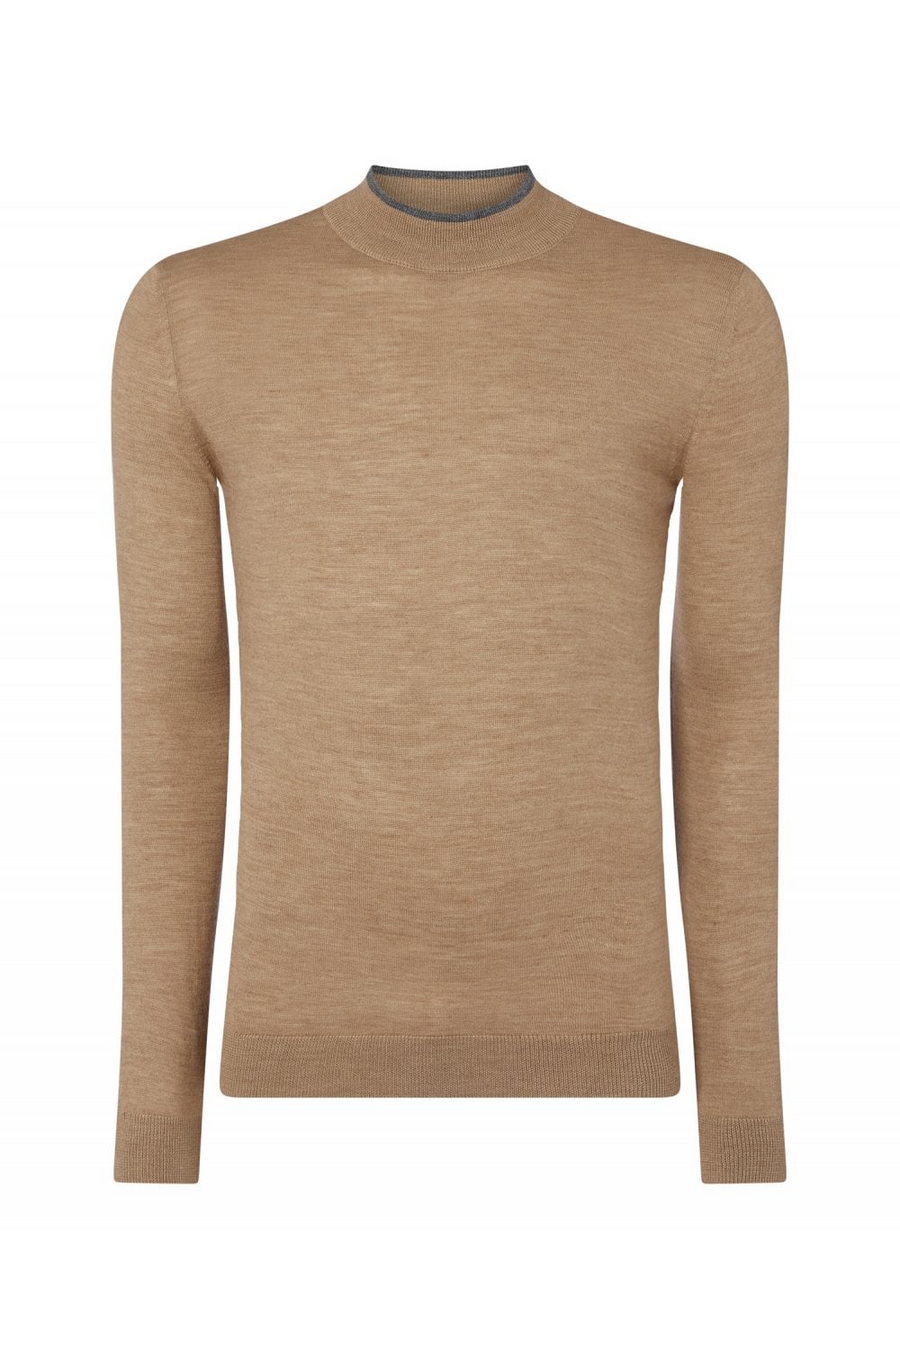 Buy the Remus Uomo Long Sleeved Turtle Neck Knit Camel at Intro. Spend £50 for free UK delivery. Official stockists. We ship worldwide.